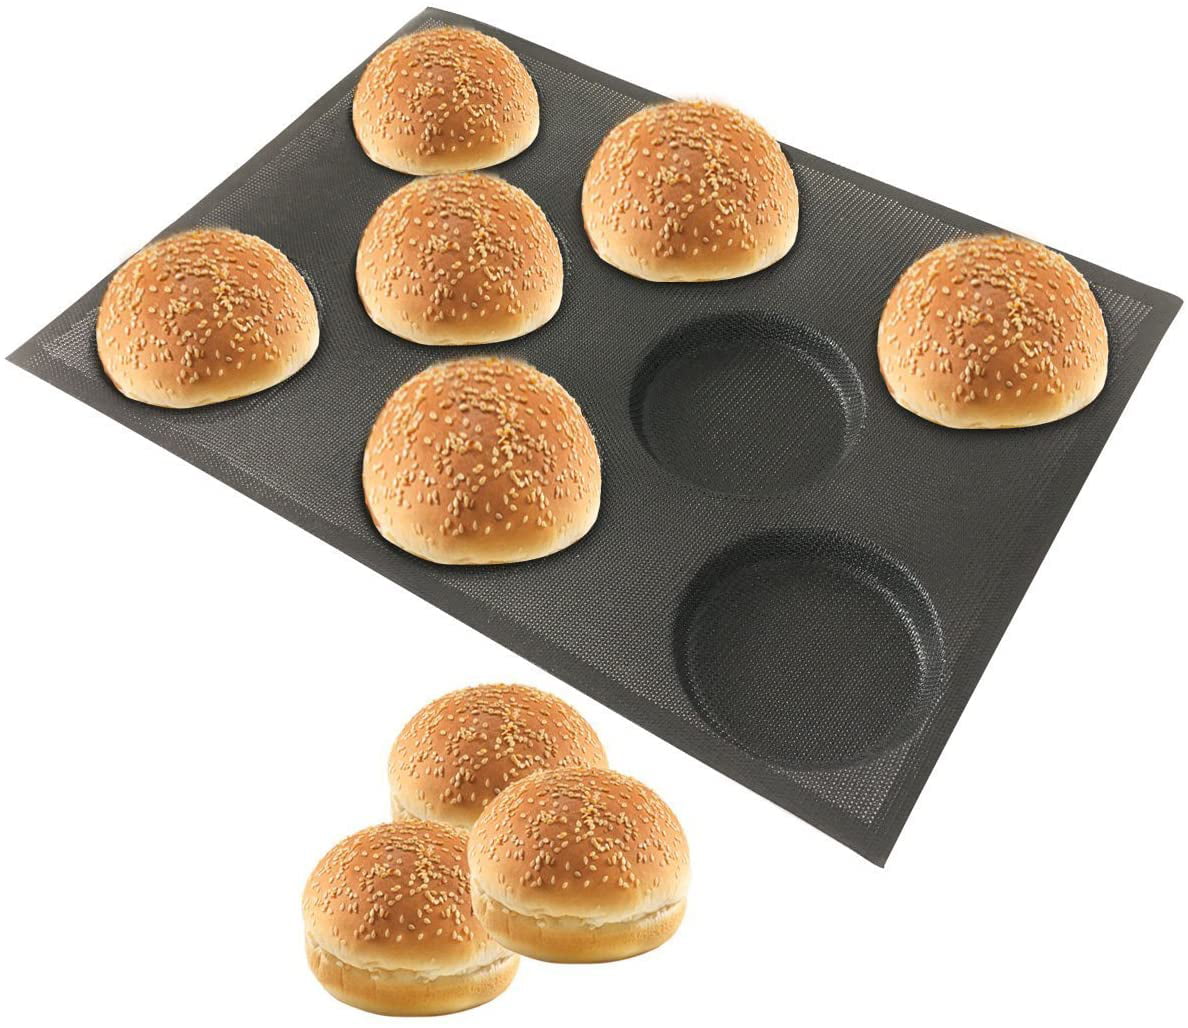 Amzchoice Silicone Non Stick Baking Liners Mat Bread Mold Bread Mould Black, 4 Loaf